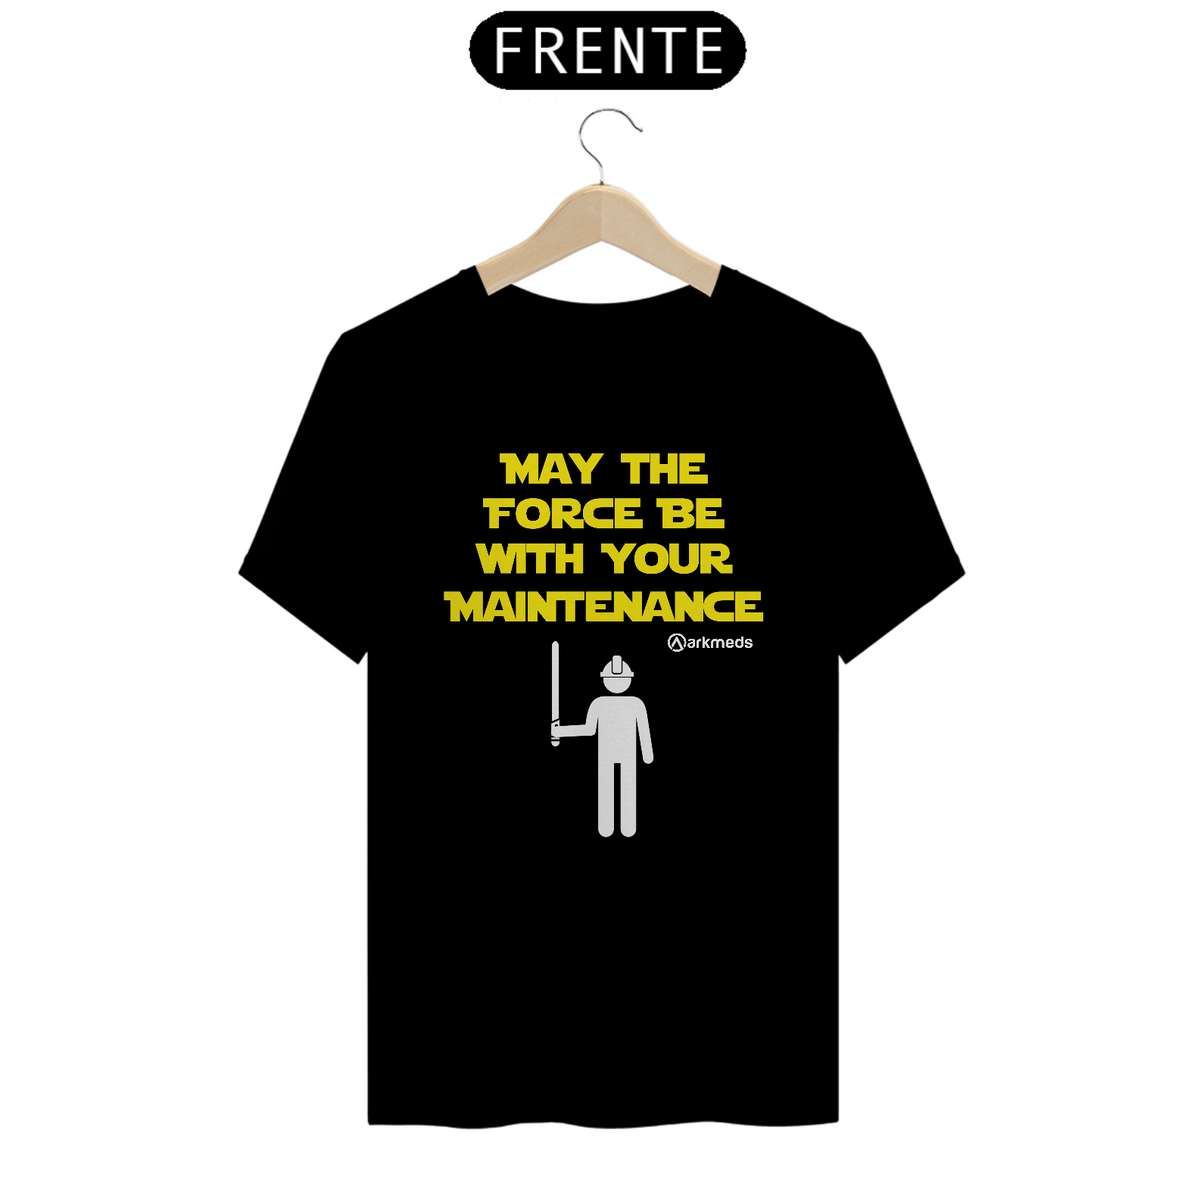 Nome do produto: Camiseta - May the Force be with your Maintenance 